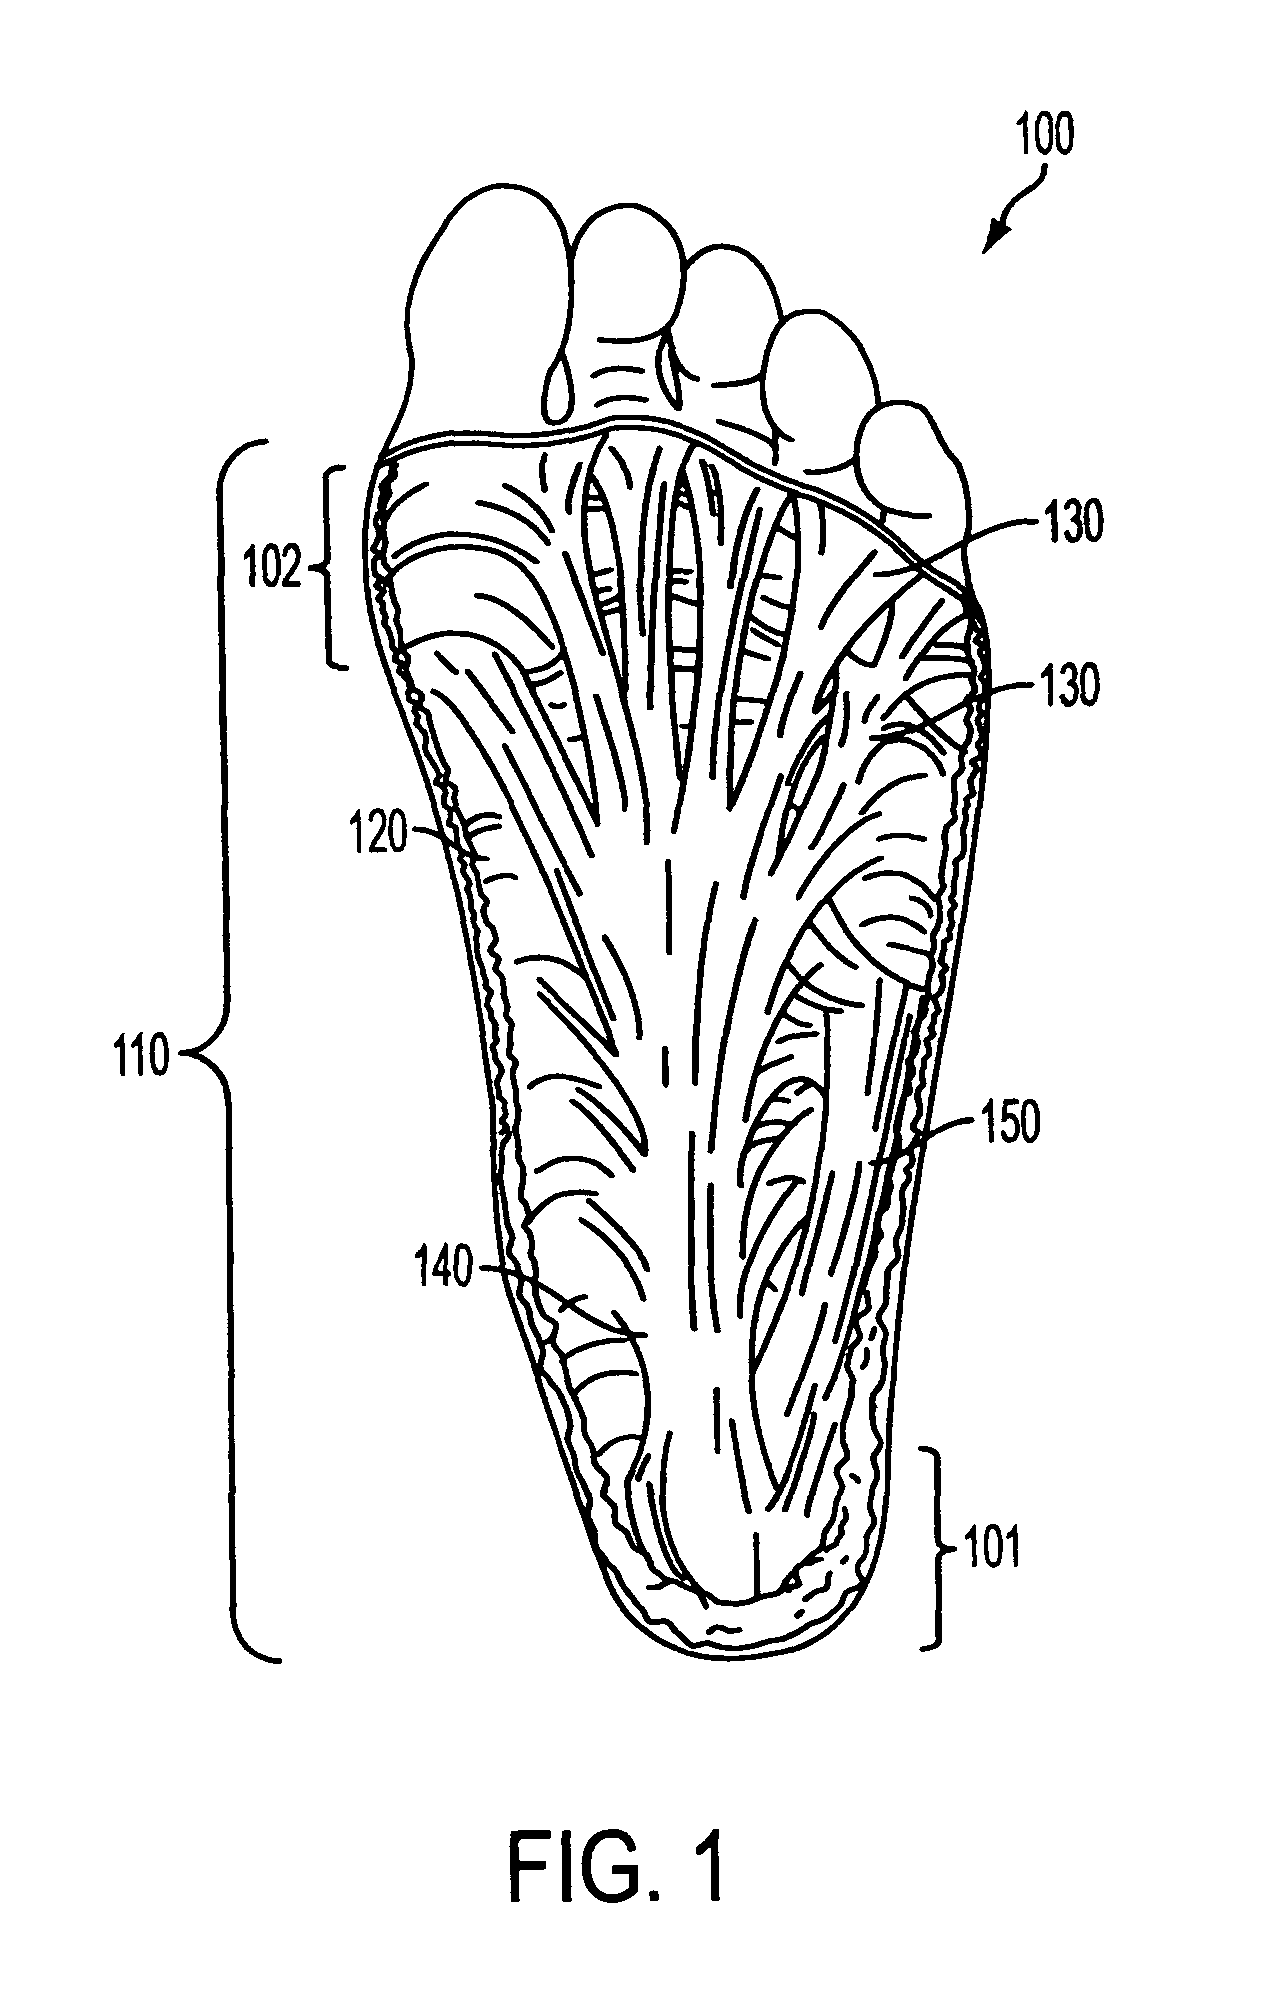 System for treatment of plantar fasciitis